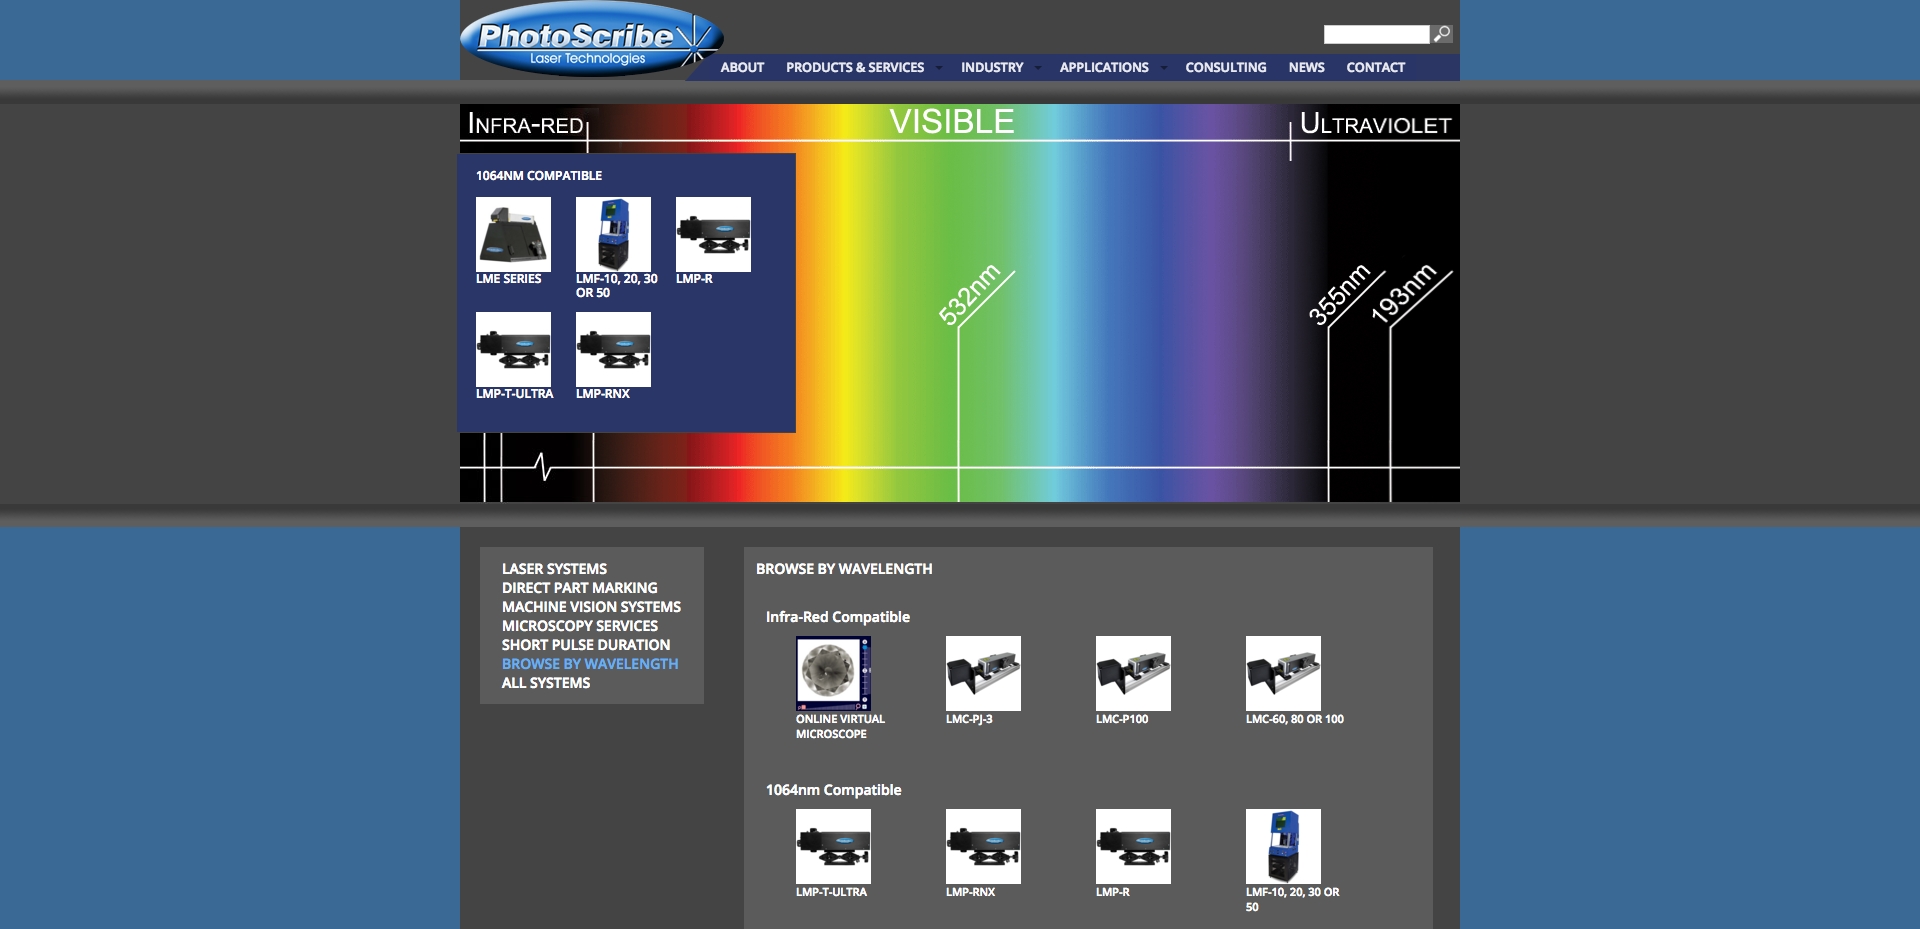 PhotoScribe website, Browse by Wavelength Page